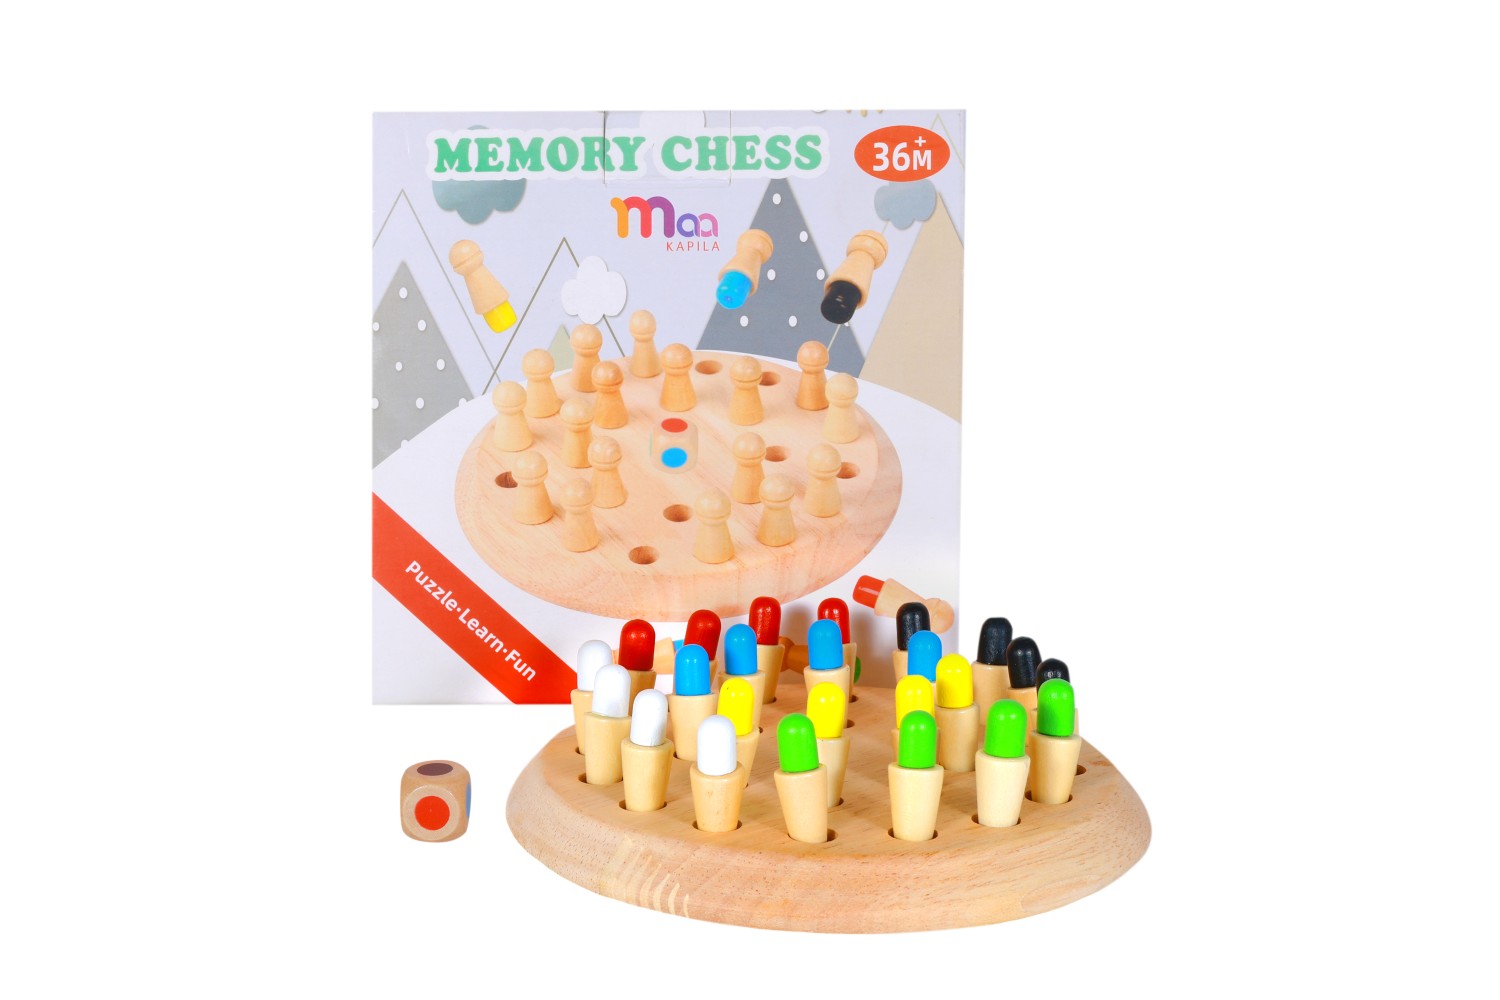 Premium Wooden Memory Chess Set - Improve Cognitive Skills and Memory Retention - Classic Chess Game with Elegant Design - Great Gift for Kids and Adults"